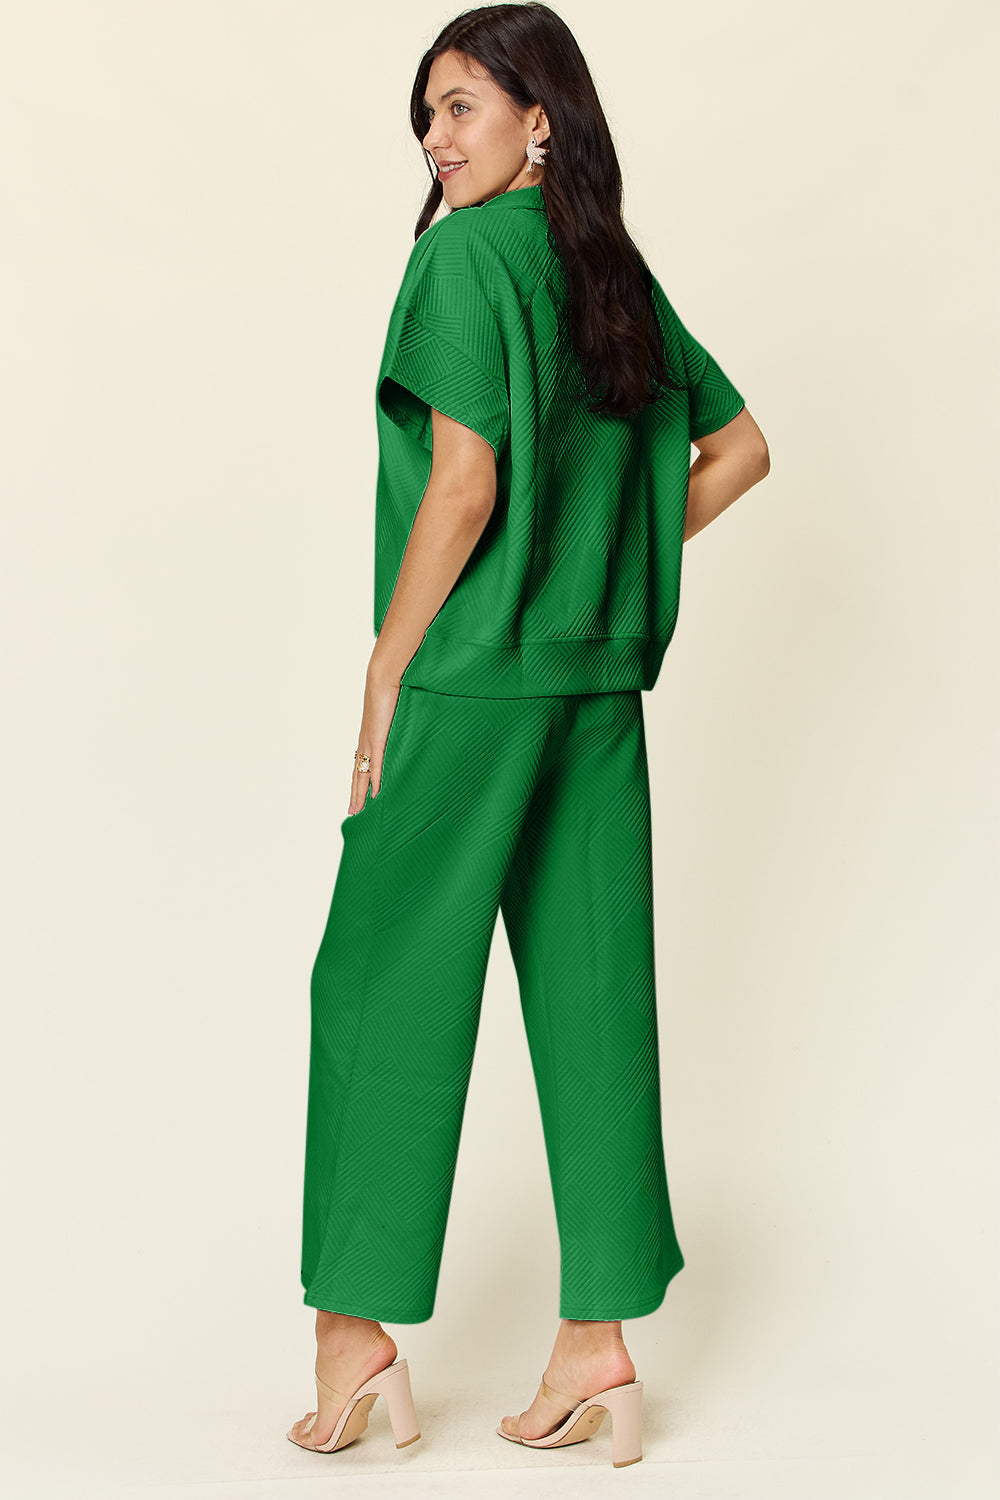 Double Take Full Size Texture Half Zip Short Sleeve Top and Pants Set